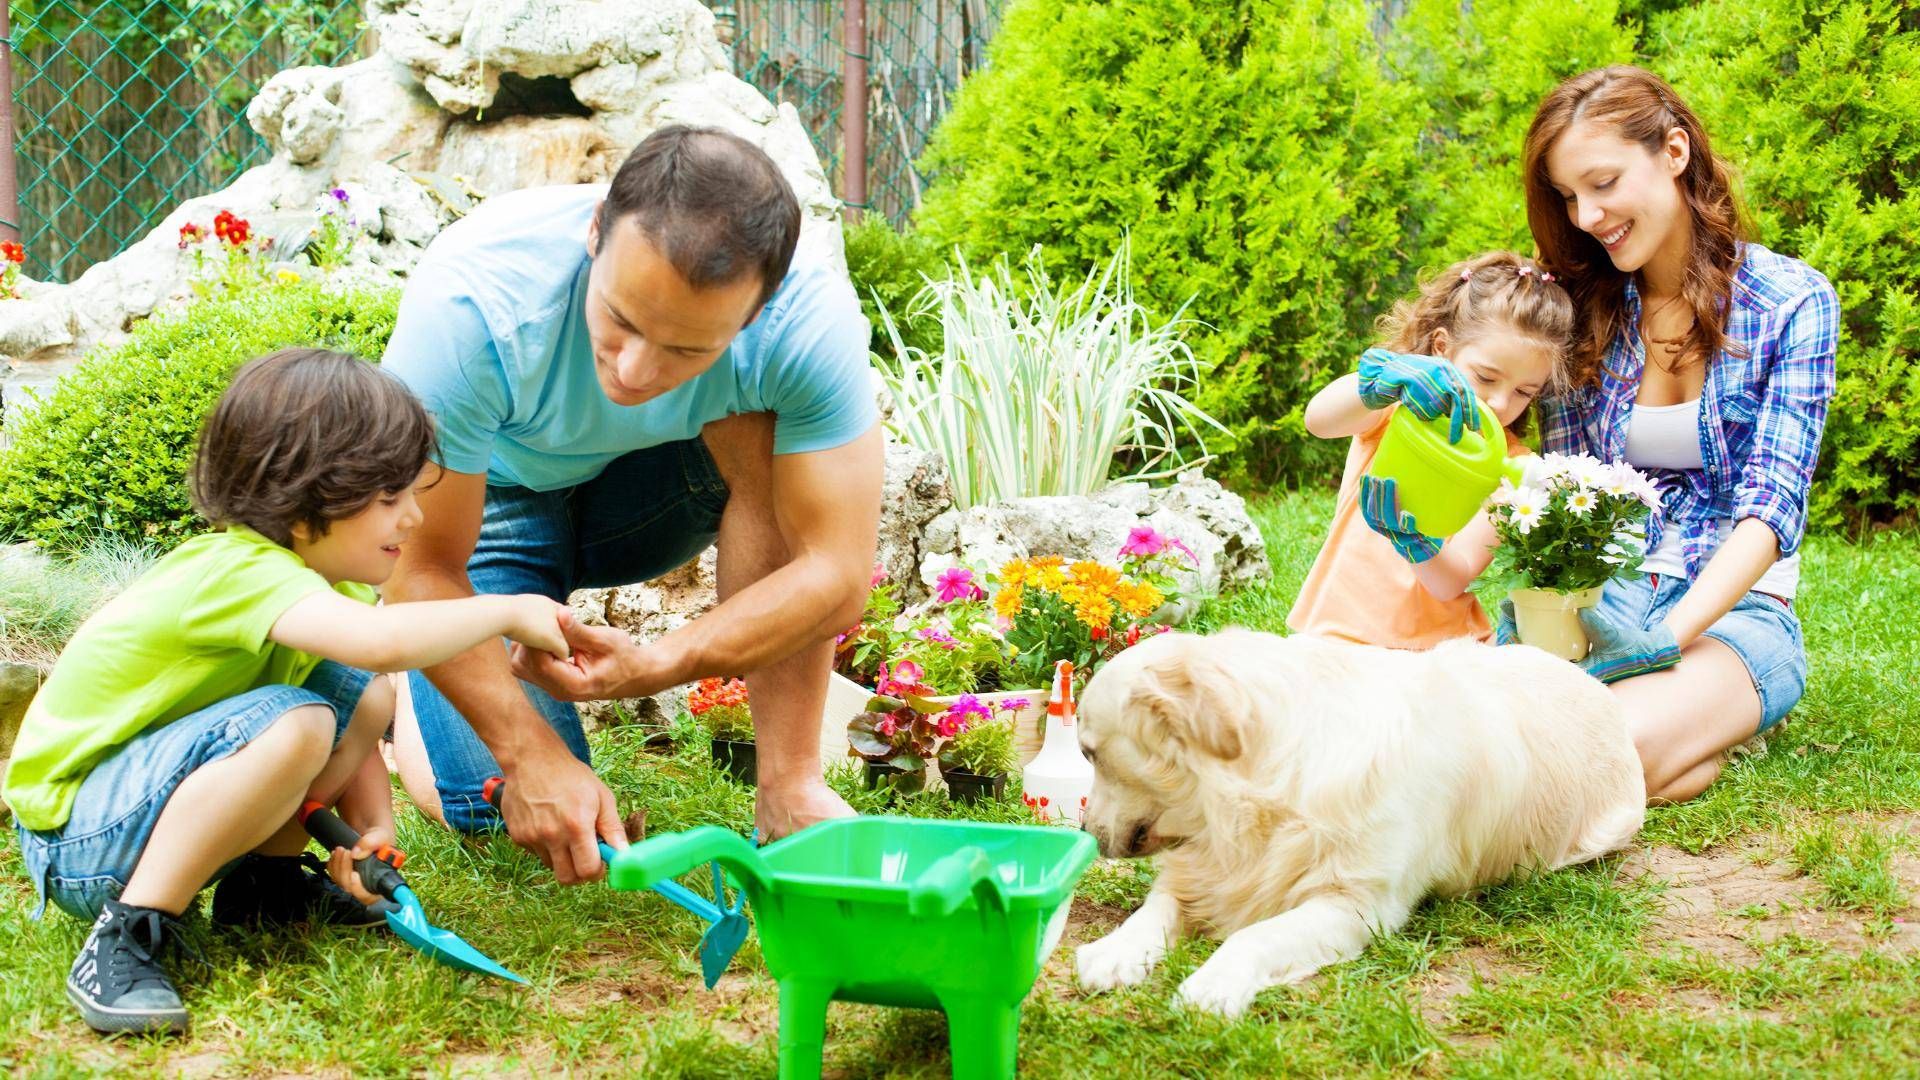 Landlords: 7 tips for protecting your garden this summer